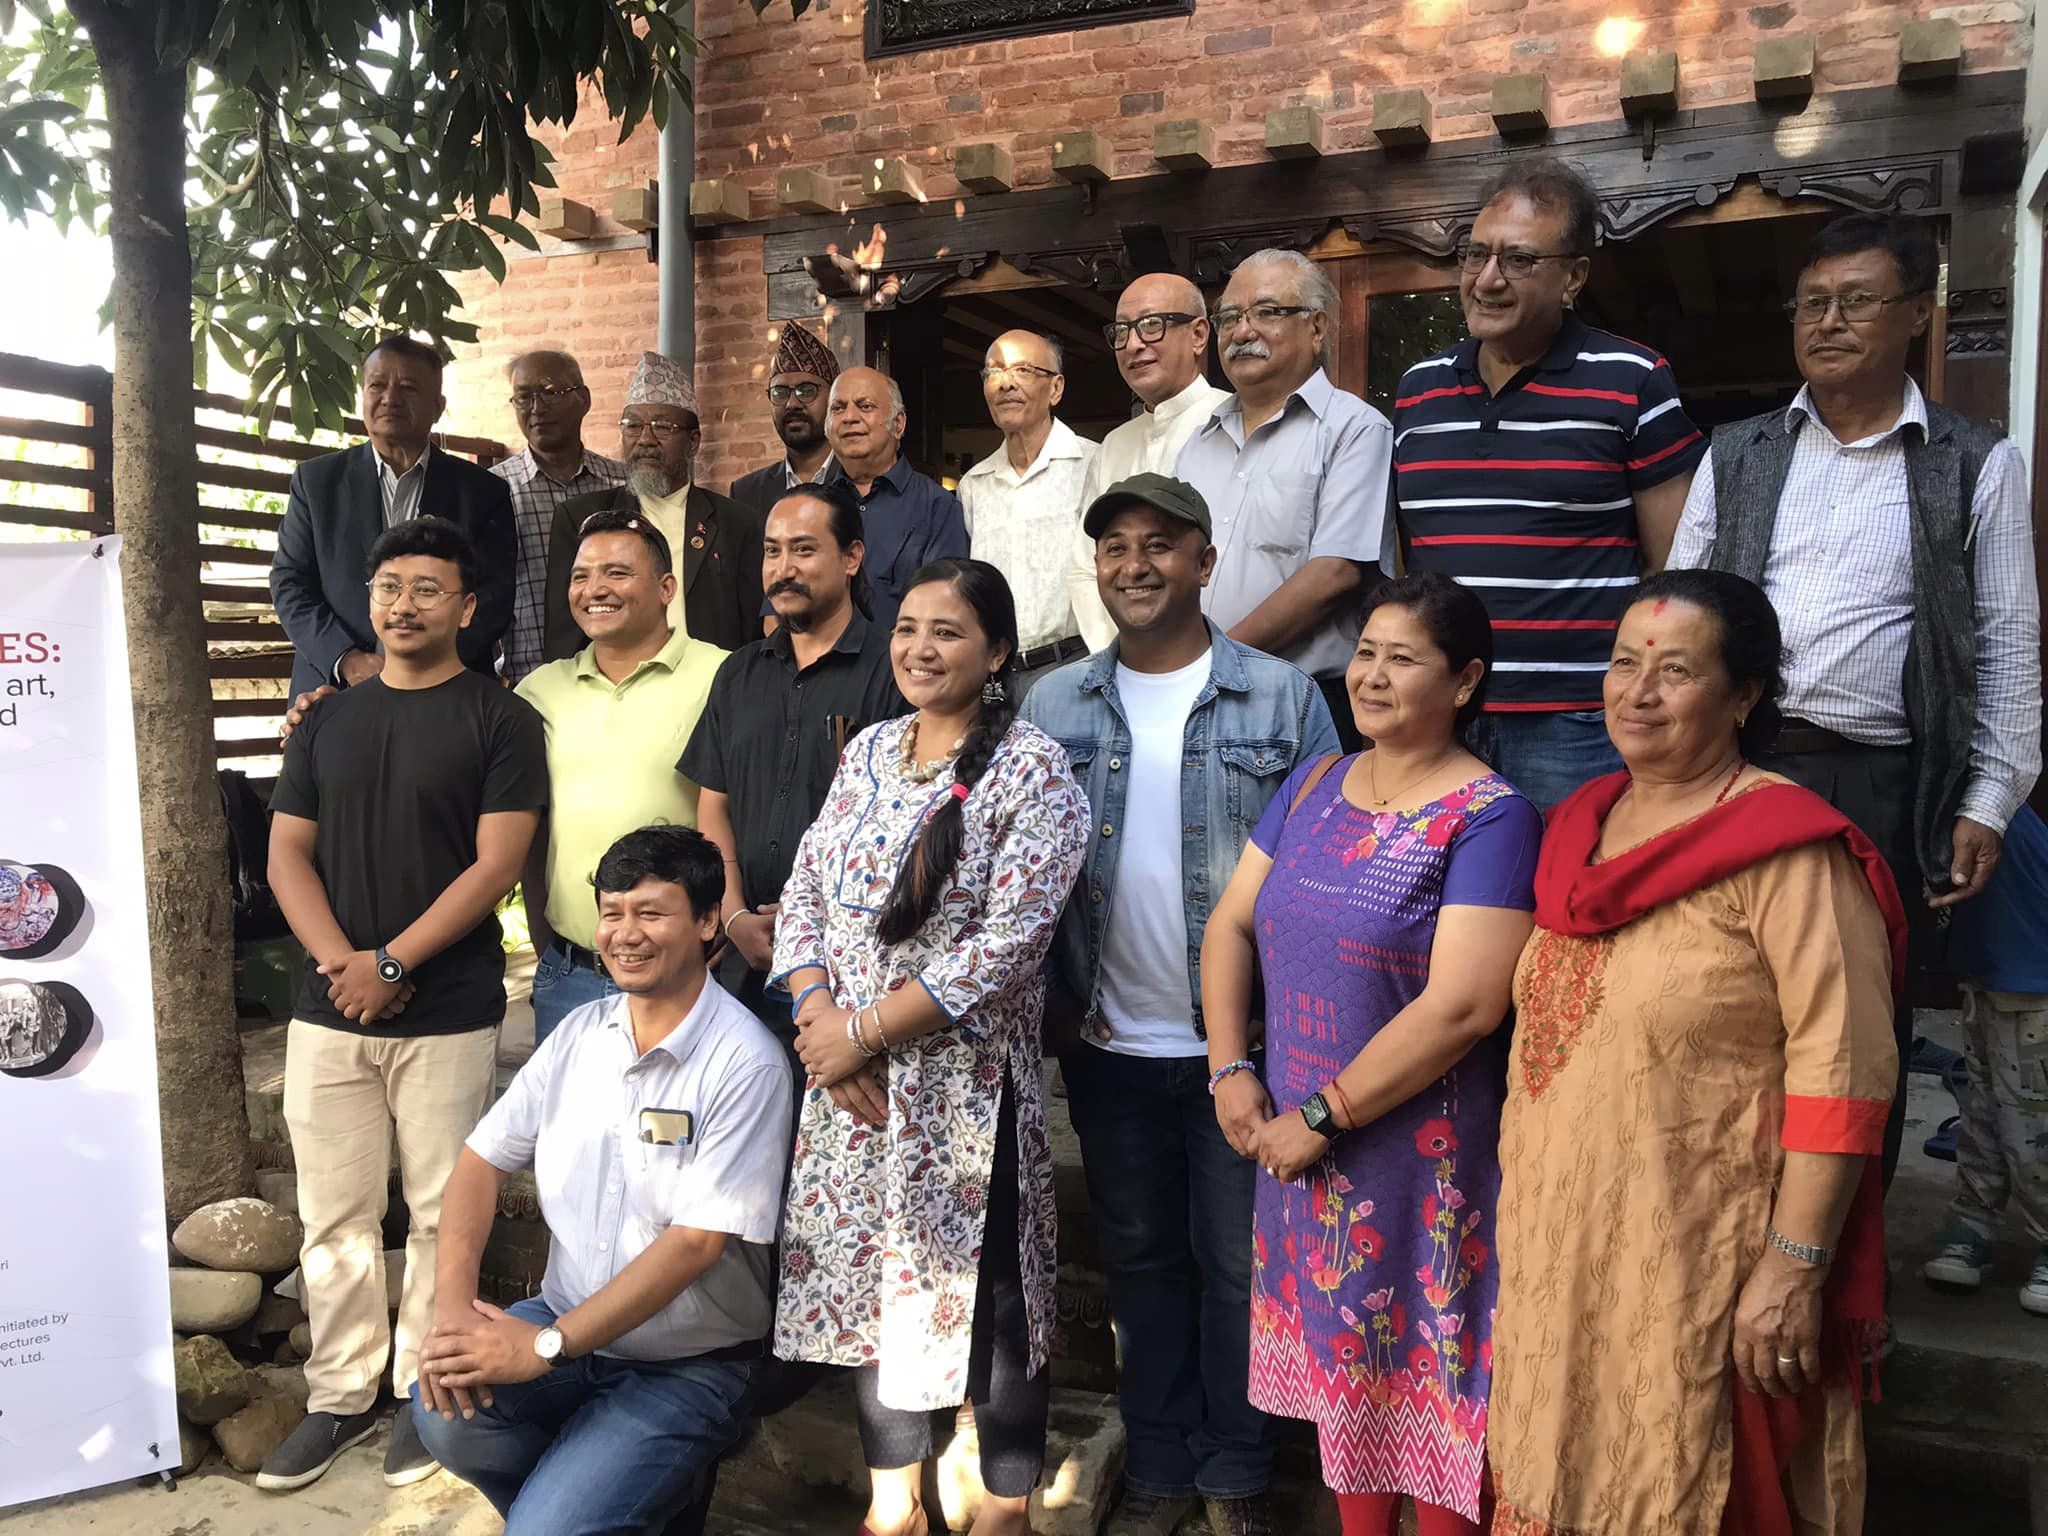 A group photo of artists and visitors Rich Museum of Craft and Design, Sunaguthi. Photo: Krishna Gopal Shrestha